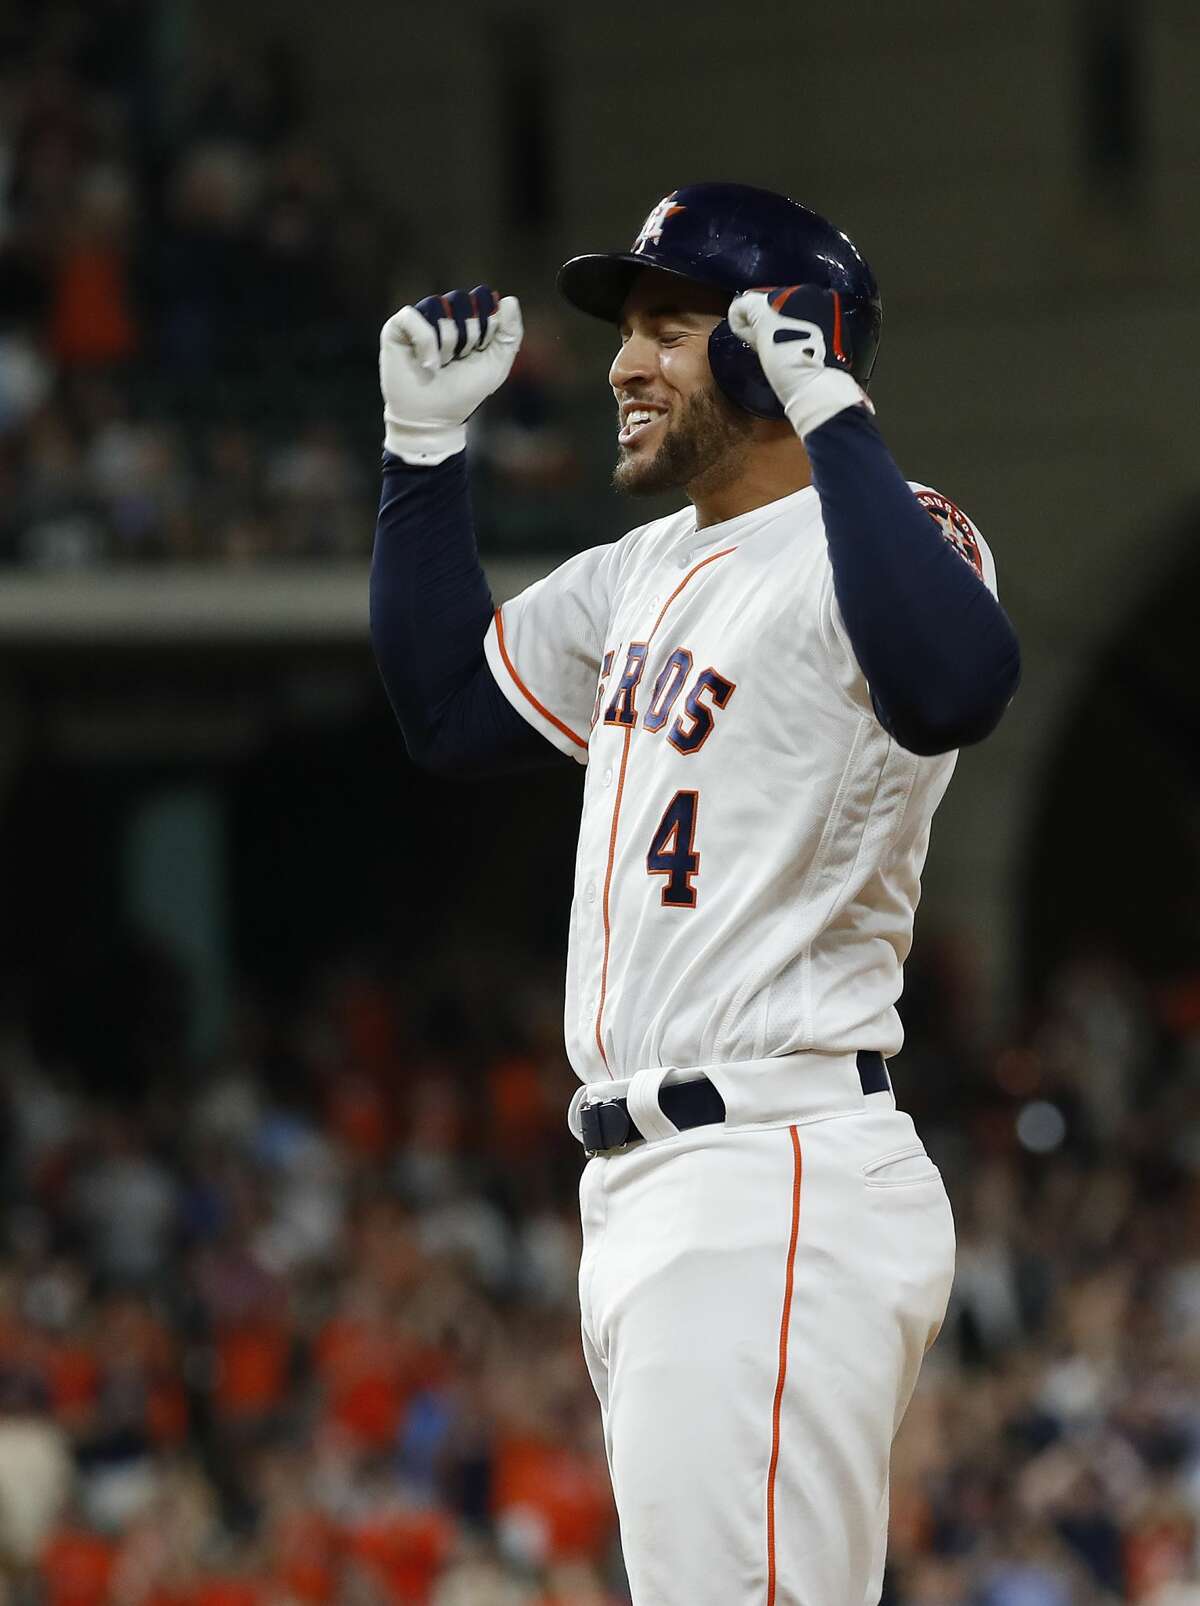 Houston Astros George Springer (4) reacts after hitting his RBI single to tie the game during the ninth inning of an MLB game at Minute Maid Park, Thursday, July 5, 2018, in Houston. ( Karen Warren / Houston Chronicle )